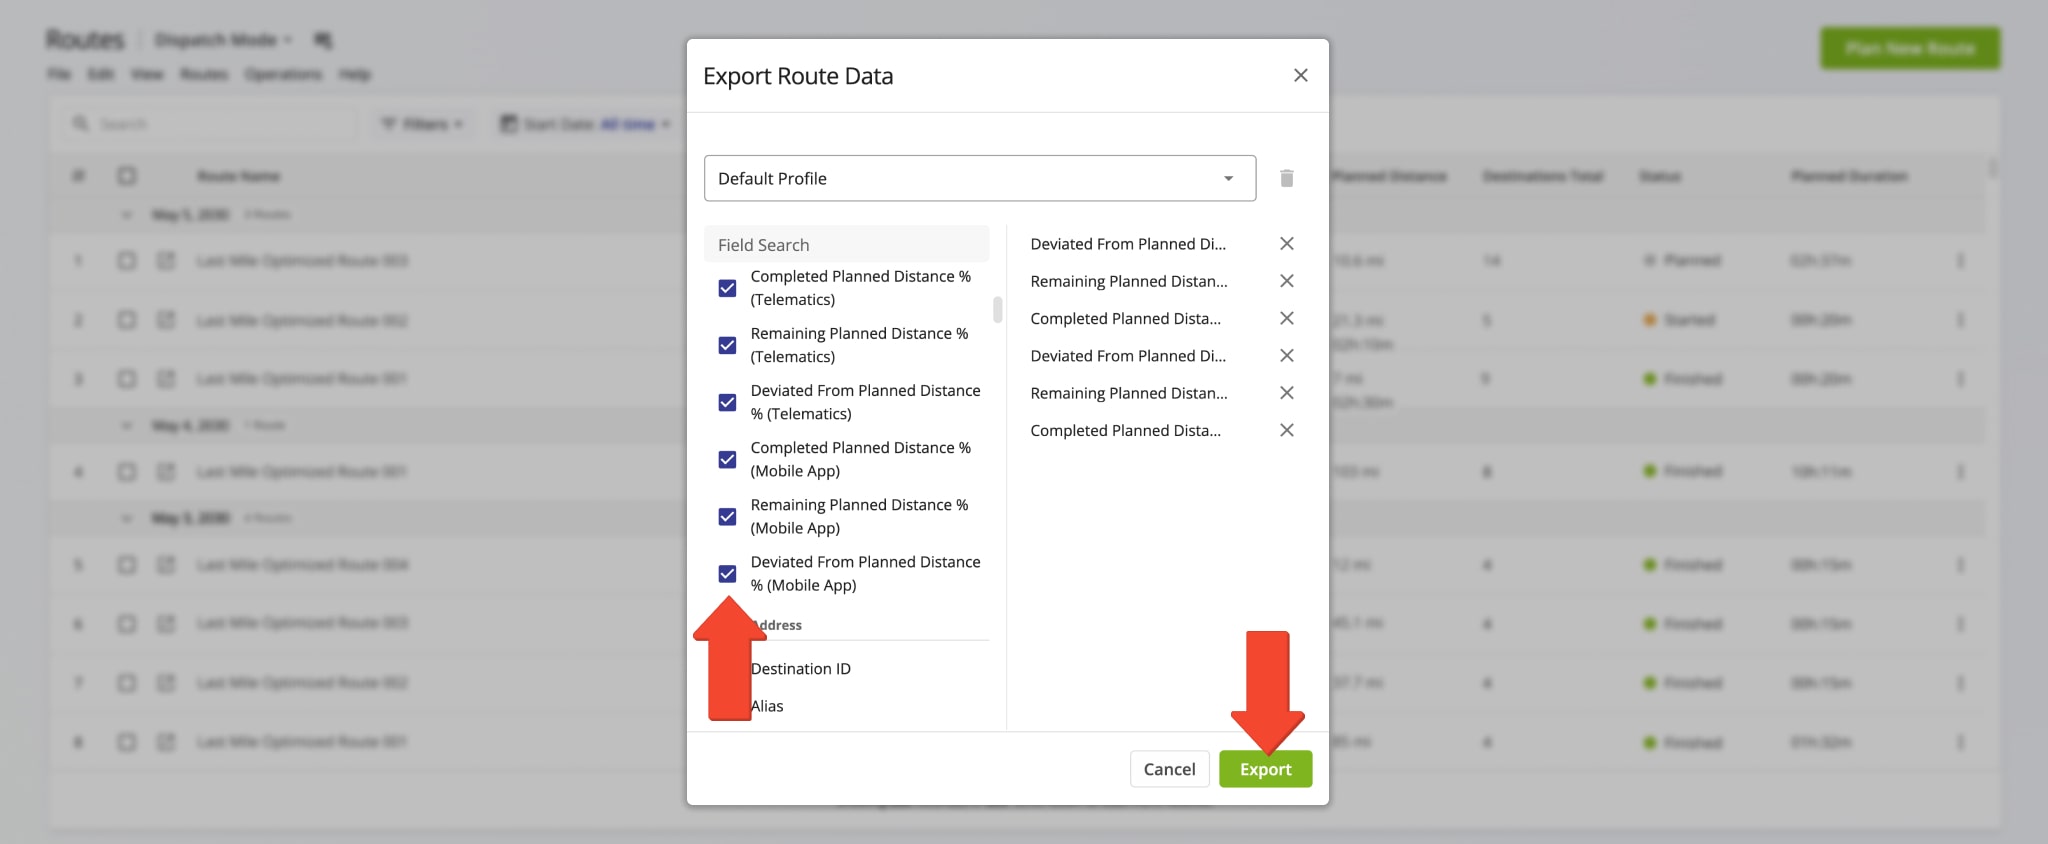 On the Export Route Data window, select the data items you want to include in your route export CSV spreadsheet in the left column.